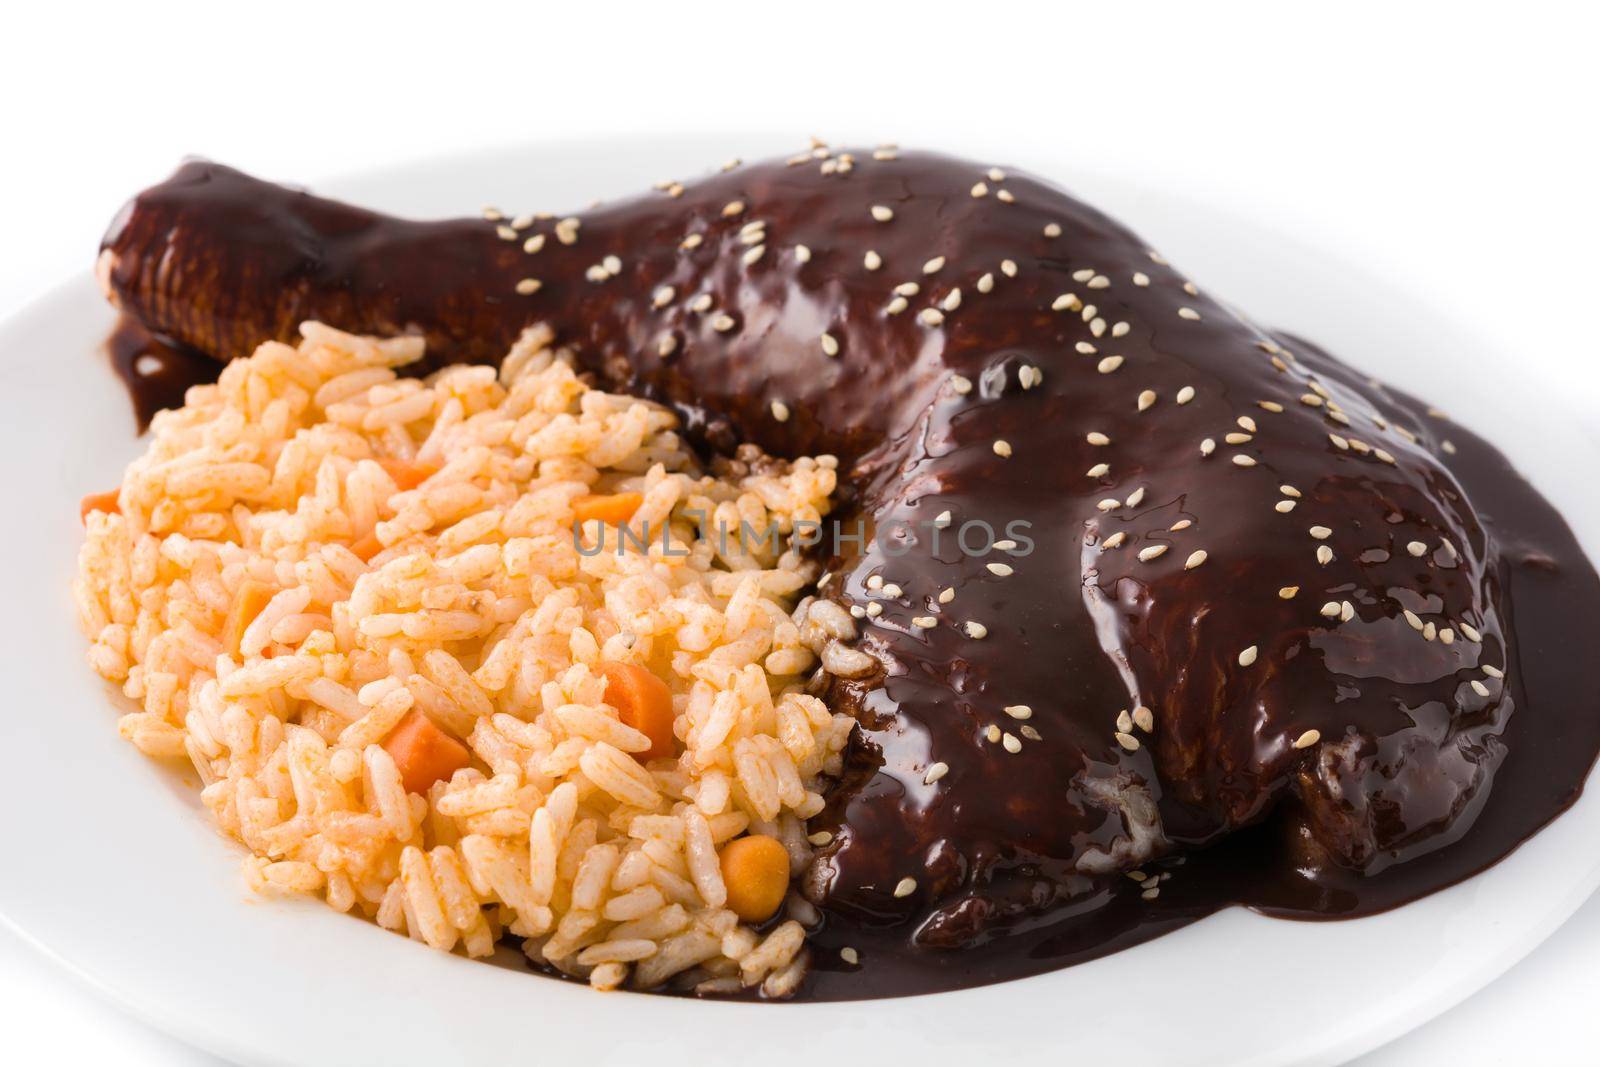 Traditional mole Poblano with rice plate by chandlervid85